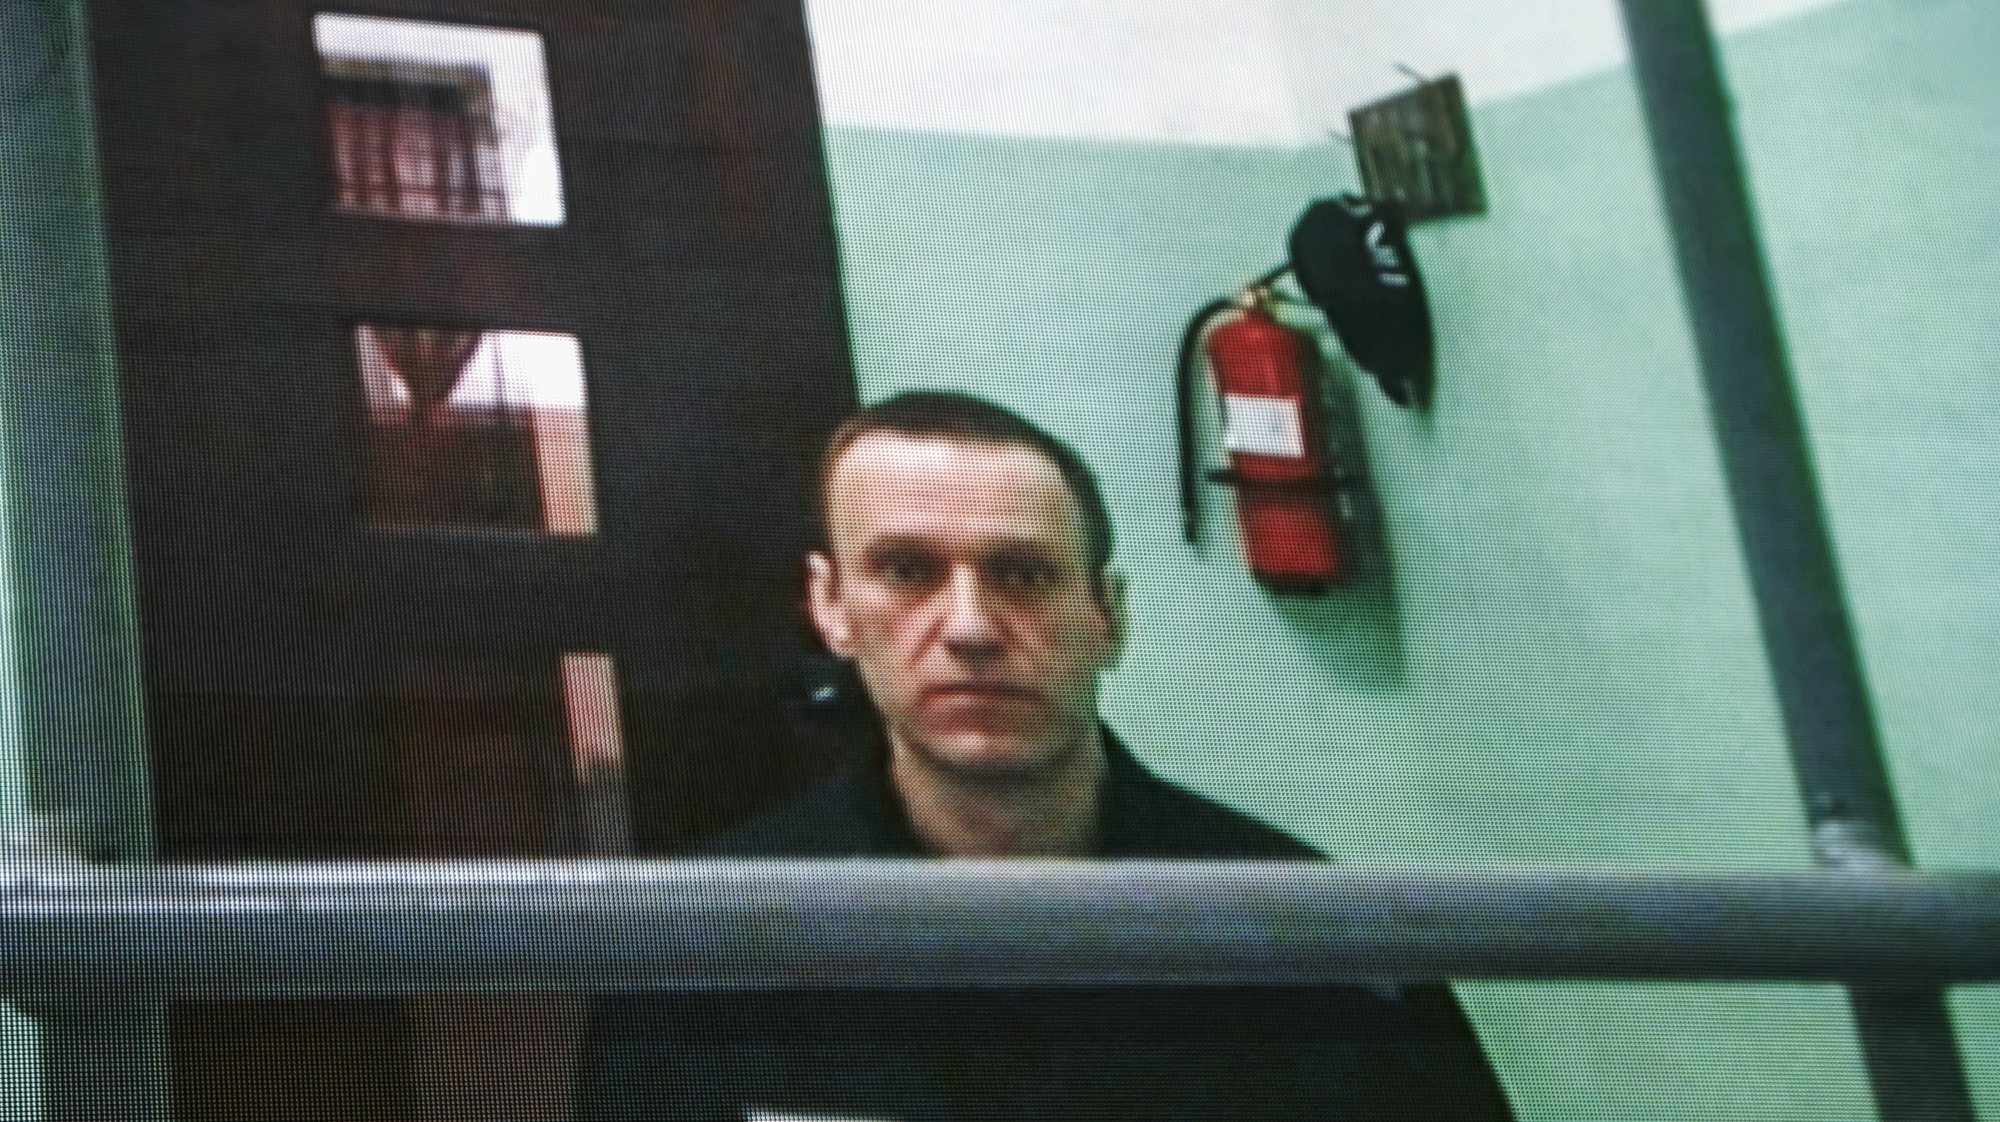 epa10705289 Russian opposition figure Alexei Navalny is seen on a screen via a video link from his penal colony during a hearing about his right to correspond while in jail, at the Russian Supreme court in Moscow, Russia, 22 June 2023.  The Supreme Court of the Russian Federation recognized as lawful the internal regulations of correctional institutions on the issuance of writing materials to persons held in punishment cells. Navalny has been in the colony since February 2021, when the court, at the request of the Federal Penitentiary Service, replaced his suspended sentence in the Yves Rocher case of 2014 with a real one. He was supposed to serve in a penal colony for 2 years and 8 months, but in March 2022, the Lefortovo Court of Moscow, at an off-site meeting in correctional colony-2 in the city of Pokrov, Vladimir Region, sentenced the politician to 9 years of strict regime and a fine of 1.2 million rub., as well as one and a half years of restriction of freedom in the case of fraud and contempt of court. In June 2022, the sentence entered into force.  EPA/SERGEI ILNITSKY